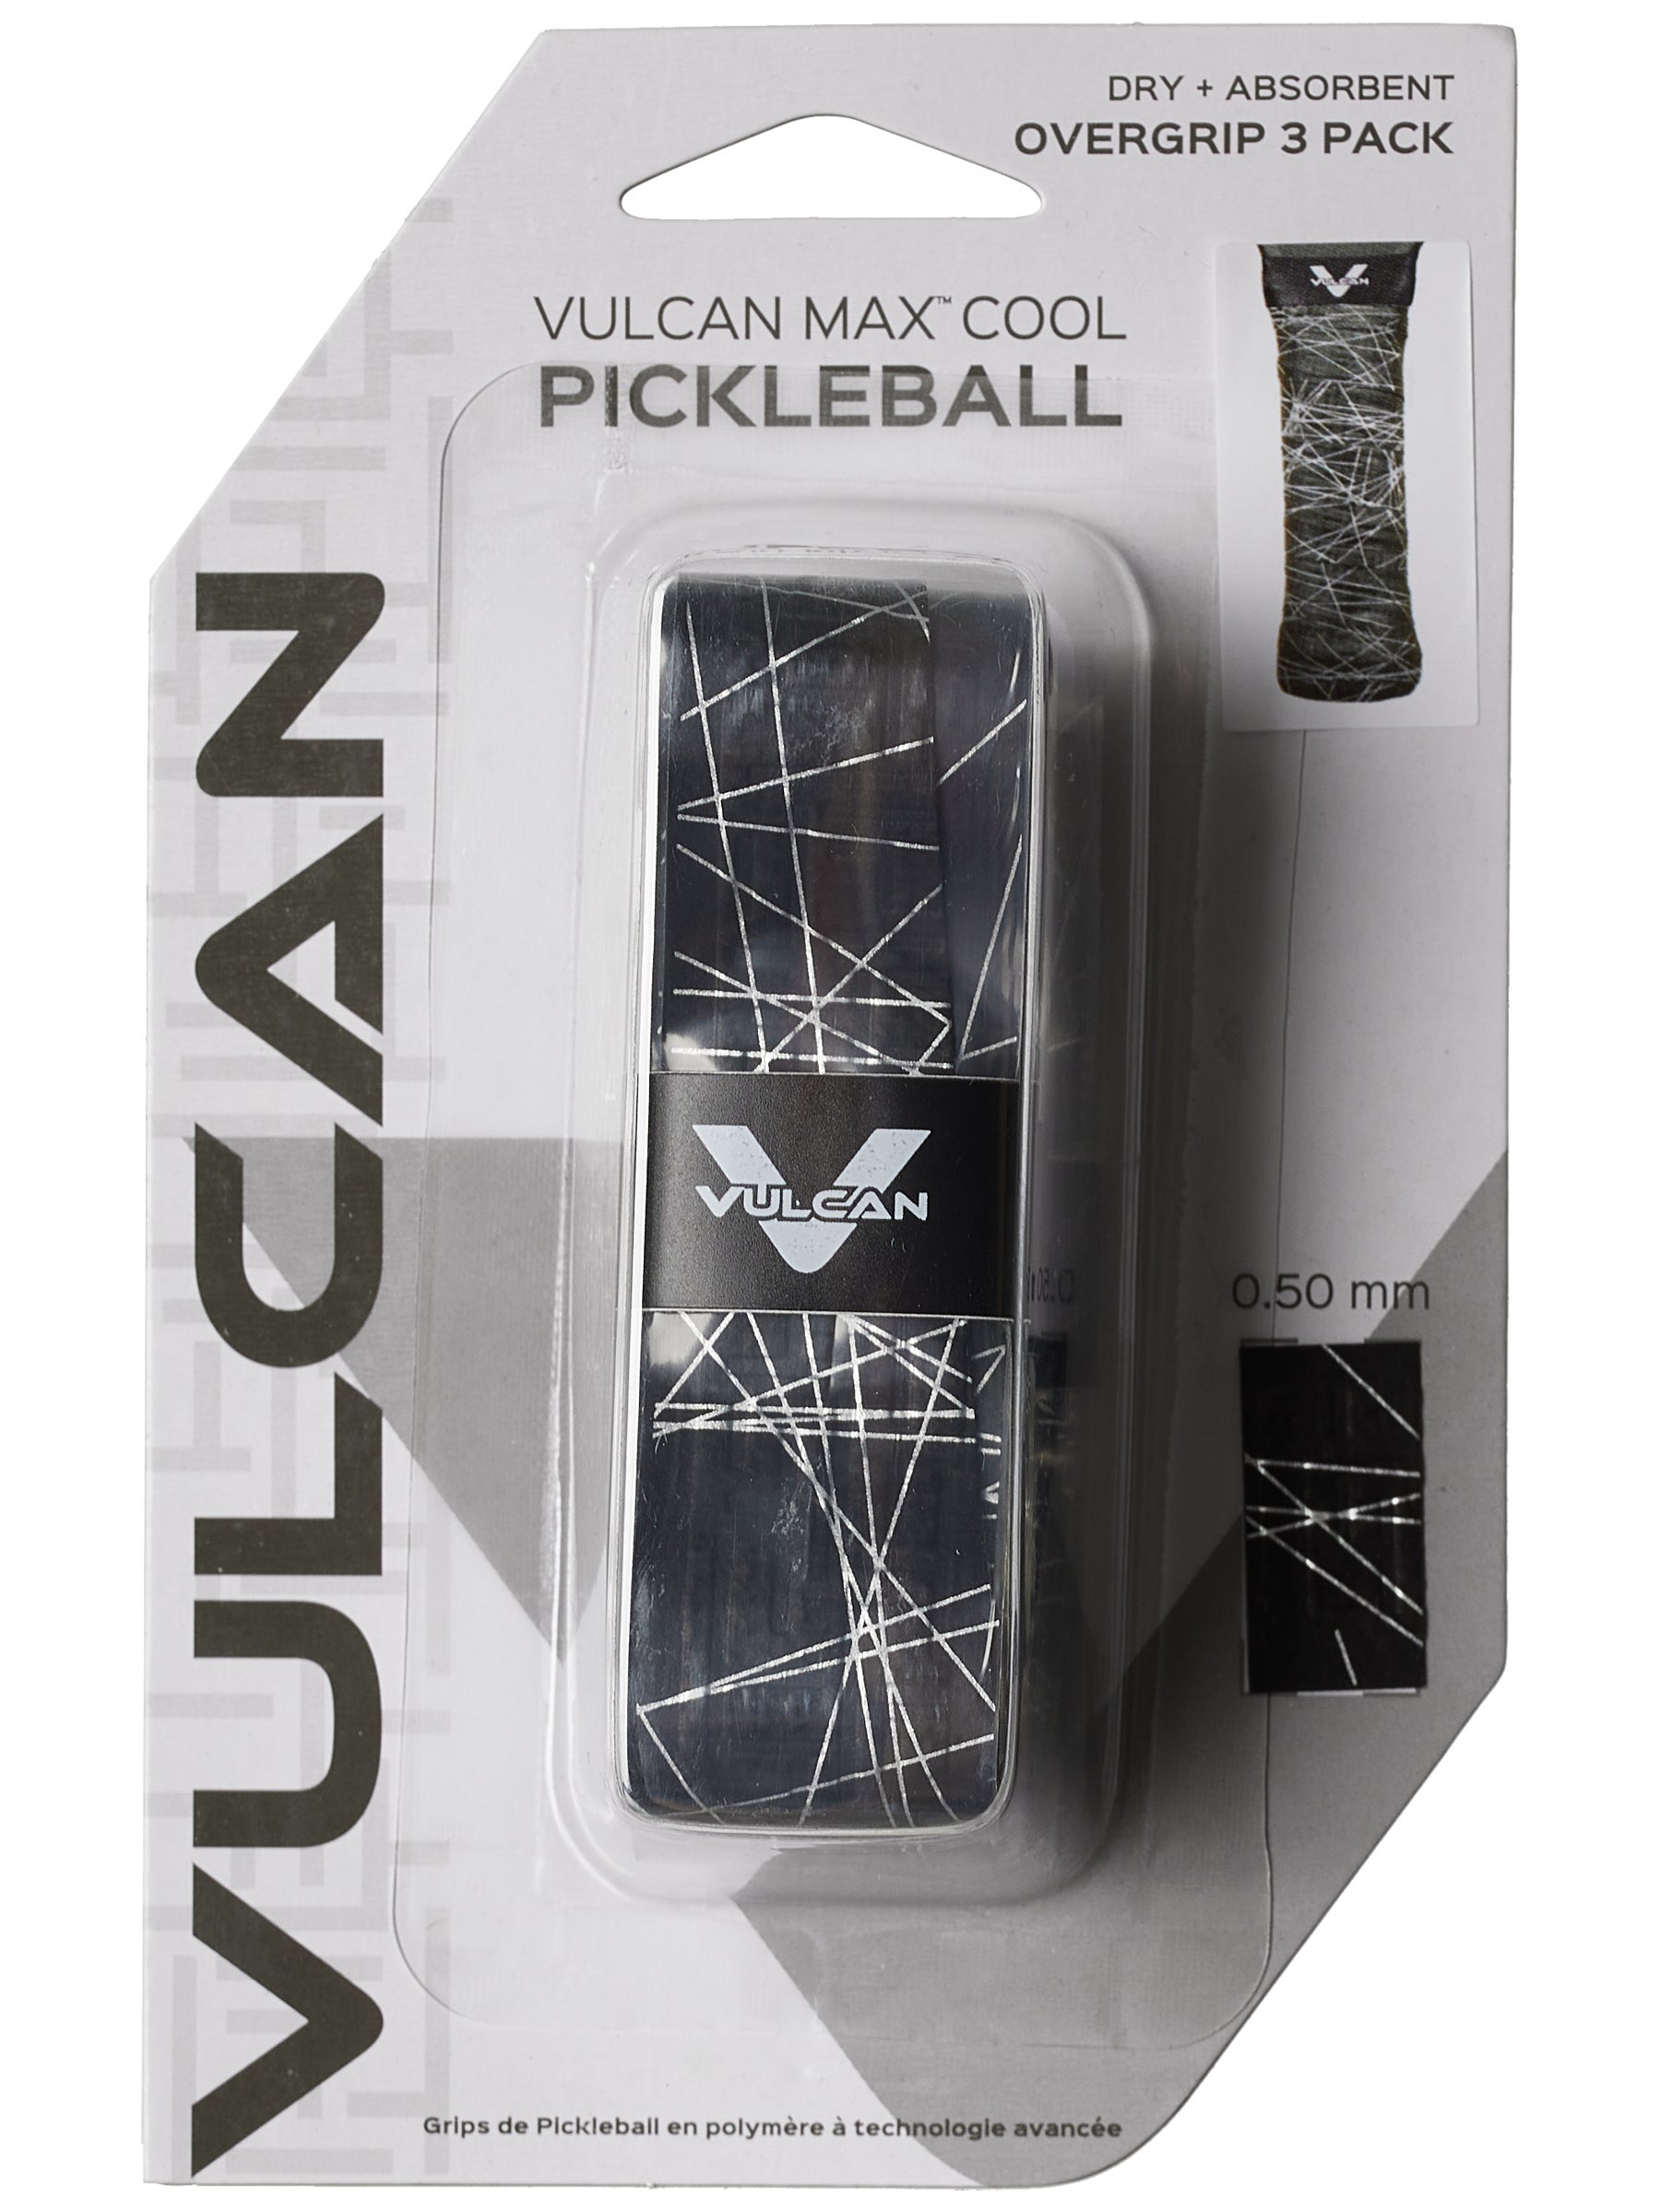 Black Vulcan Max Cool Pickleball Paddle Overgrips 3 Pack 